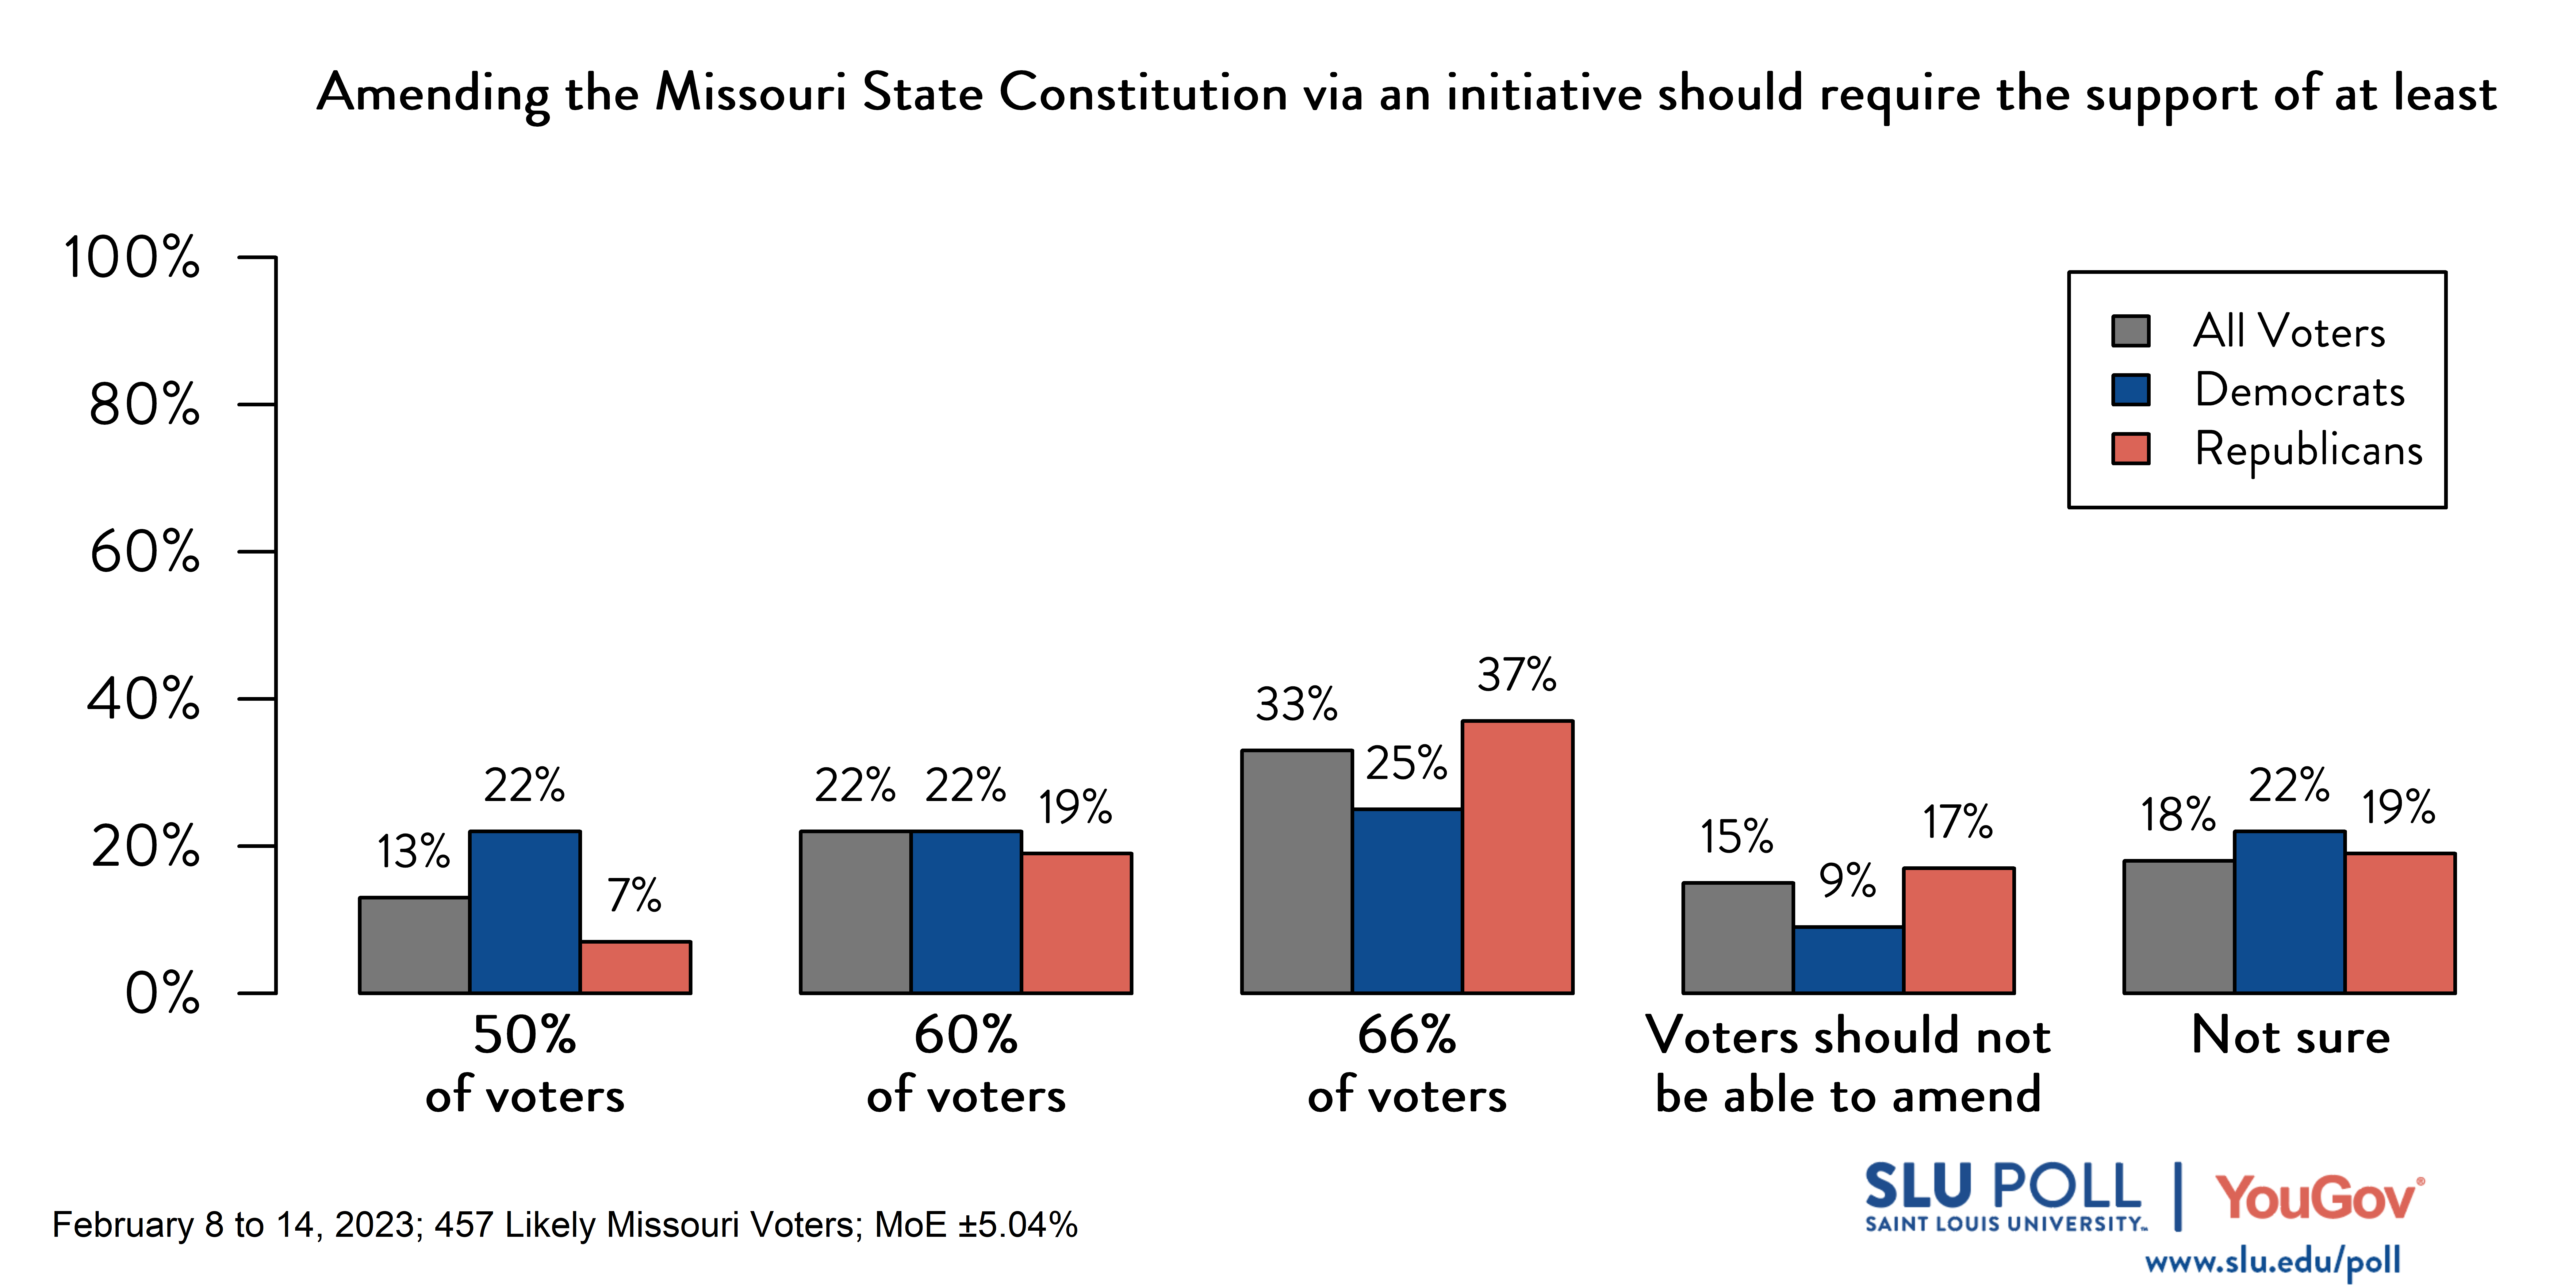 Likely voters' responses to 'Amending the Missouri State Constitution via an initiative should require the support of at least:': 13% 50% of voters, 22% 60% of voters, 33% 66% of voters, 15% Voters should not be able to amend the state constitution via an initiative, and 18% Not sure. Democratic voters' responses: ' 22% 50% of voters, 22% 60% of voters, 25% 66% of voters, 9% Voters should not be able to amend the state constitution via an initiative, and 22% Not sure. Republican voters' responses: 7% 50% of voters, 19% 60% of voters, 37% 66% of voters, 17% Voters should not be able to amend the state constitution via an initiative, and 19% Not sure.